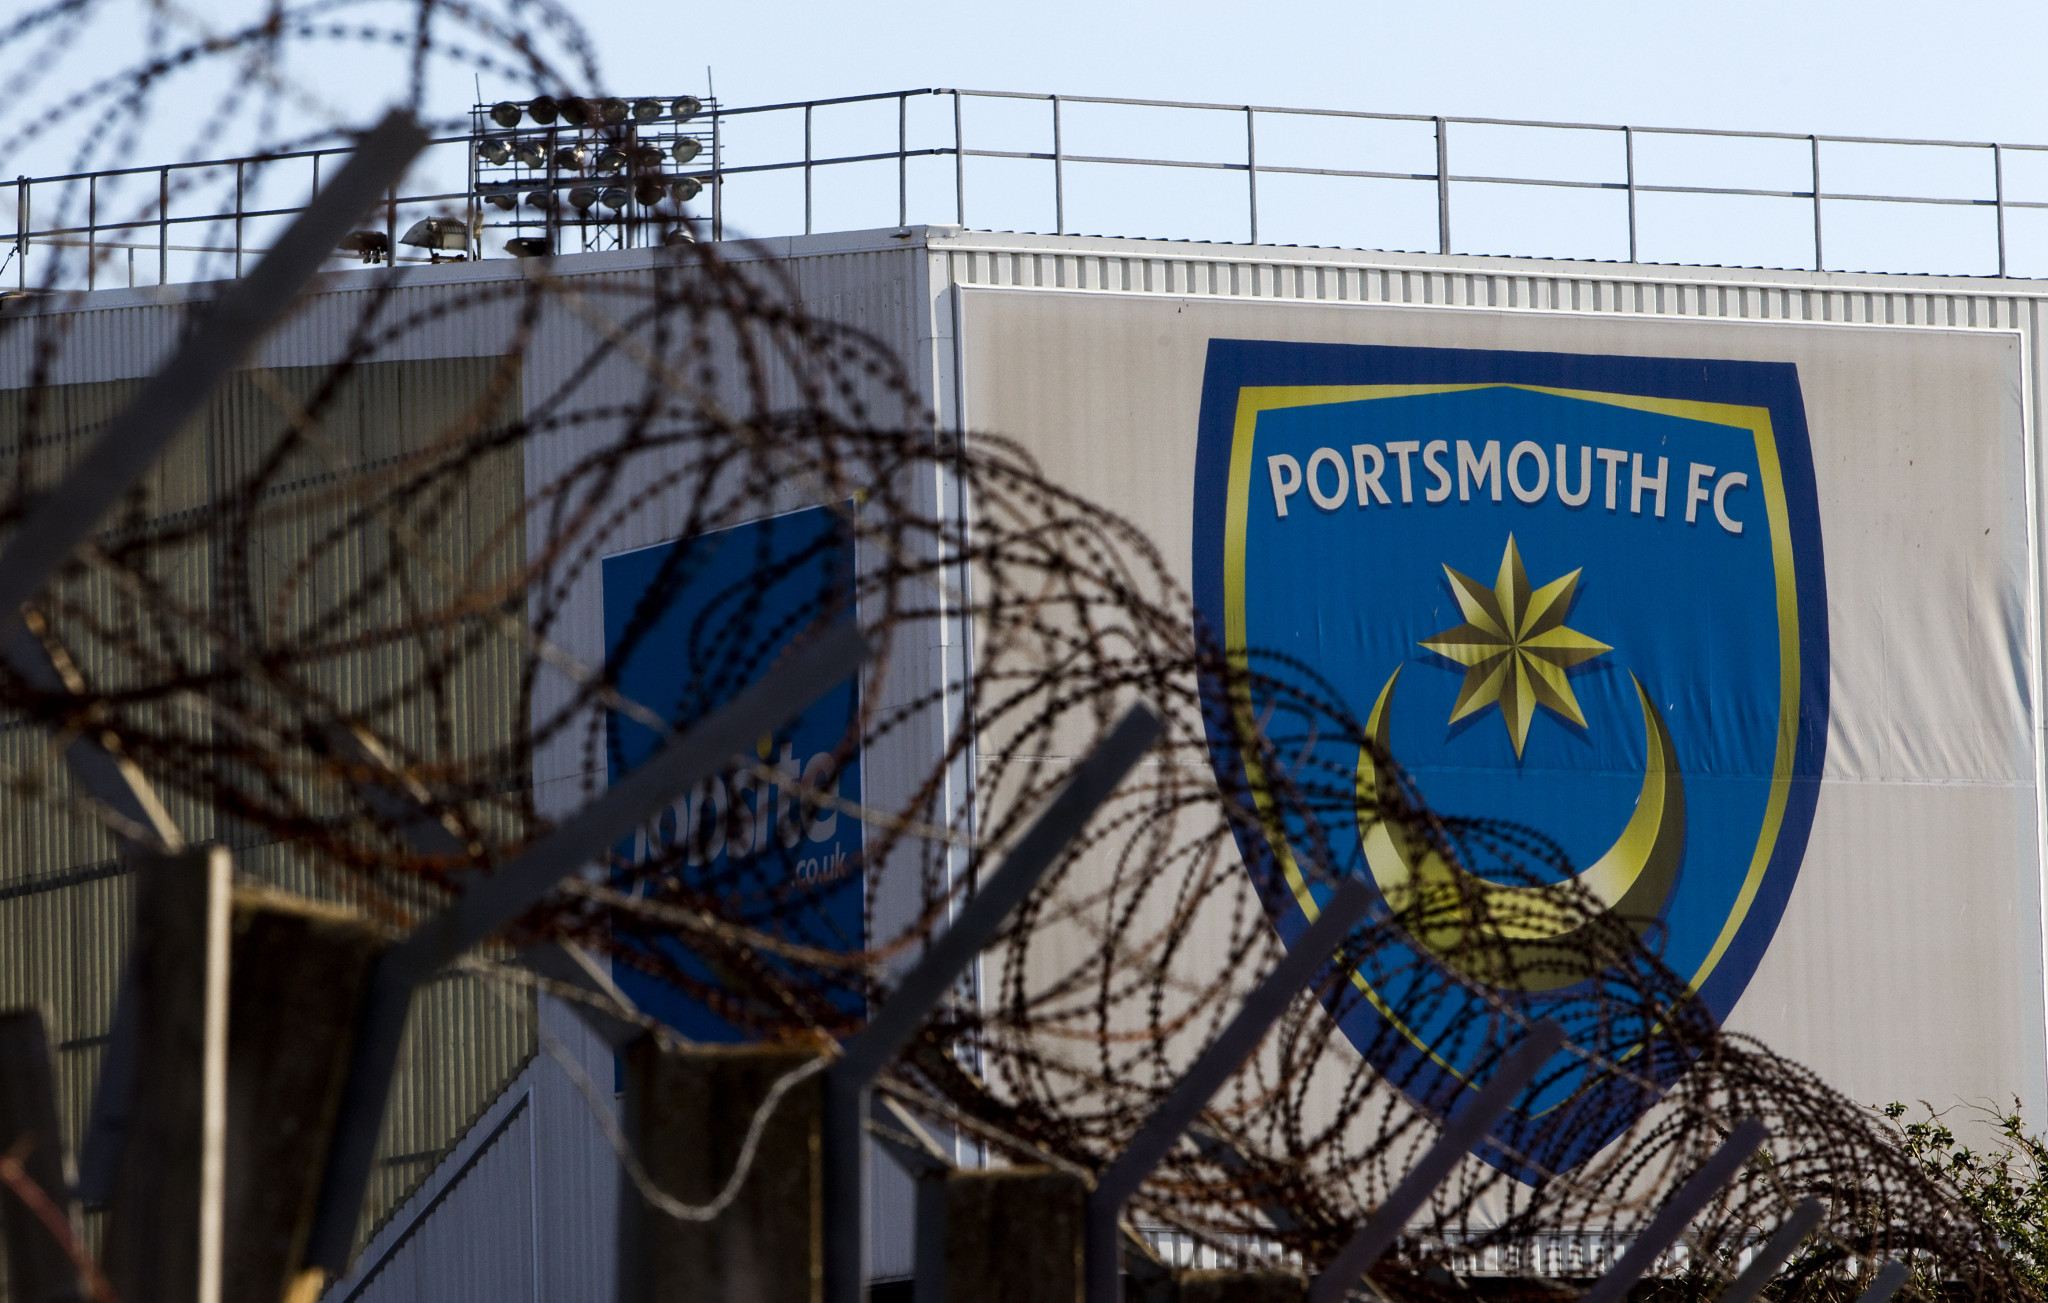 Portsmouth FC have scheduled a friendly against Qatar SC which is set to take place on July 9 in Spain ©Getty Images